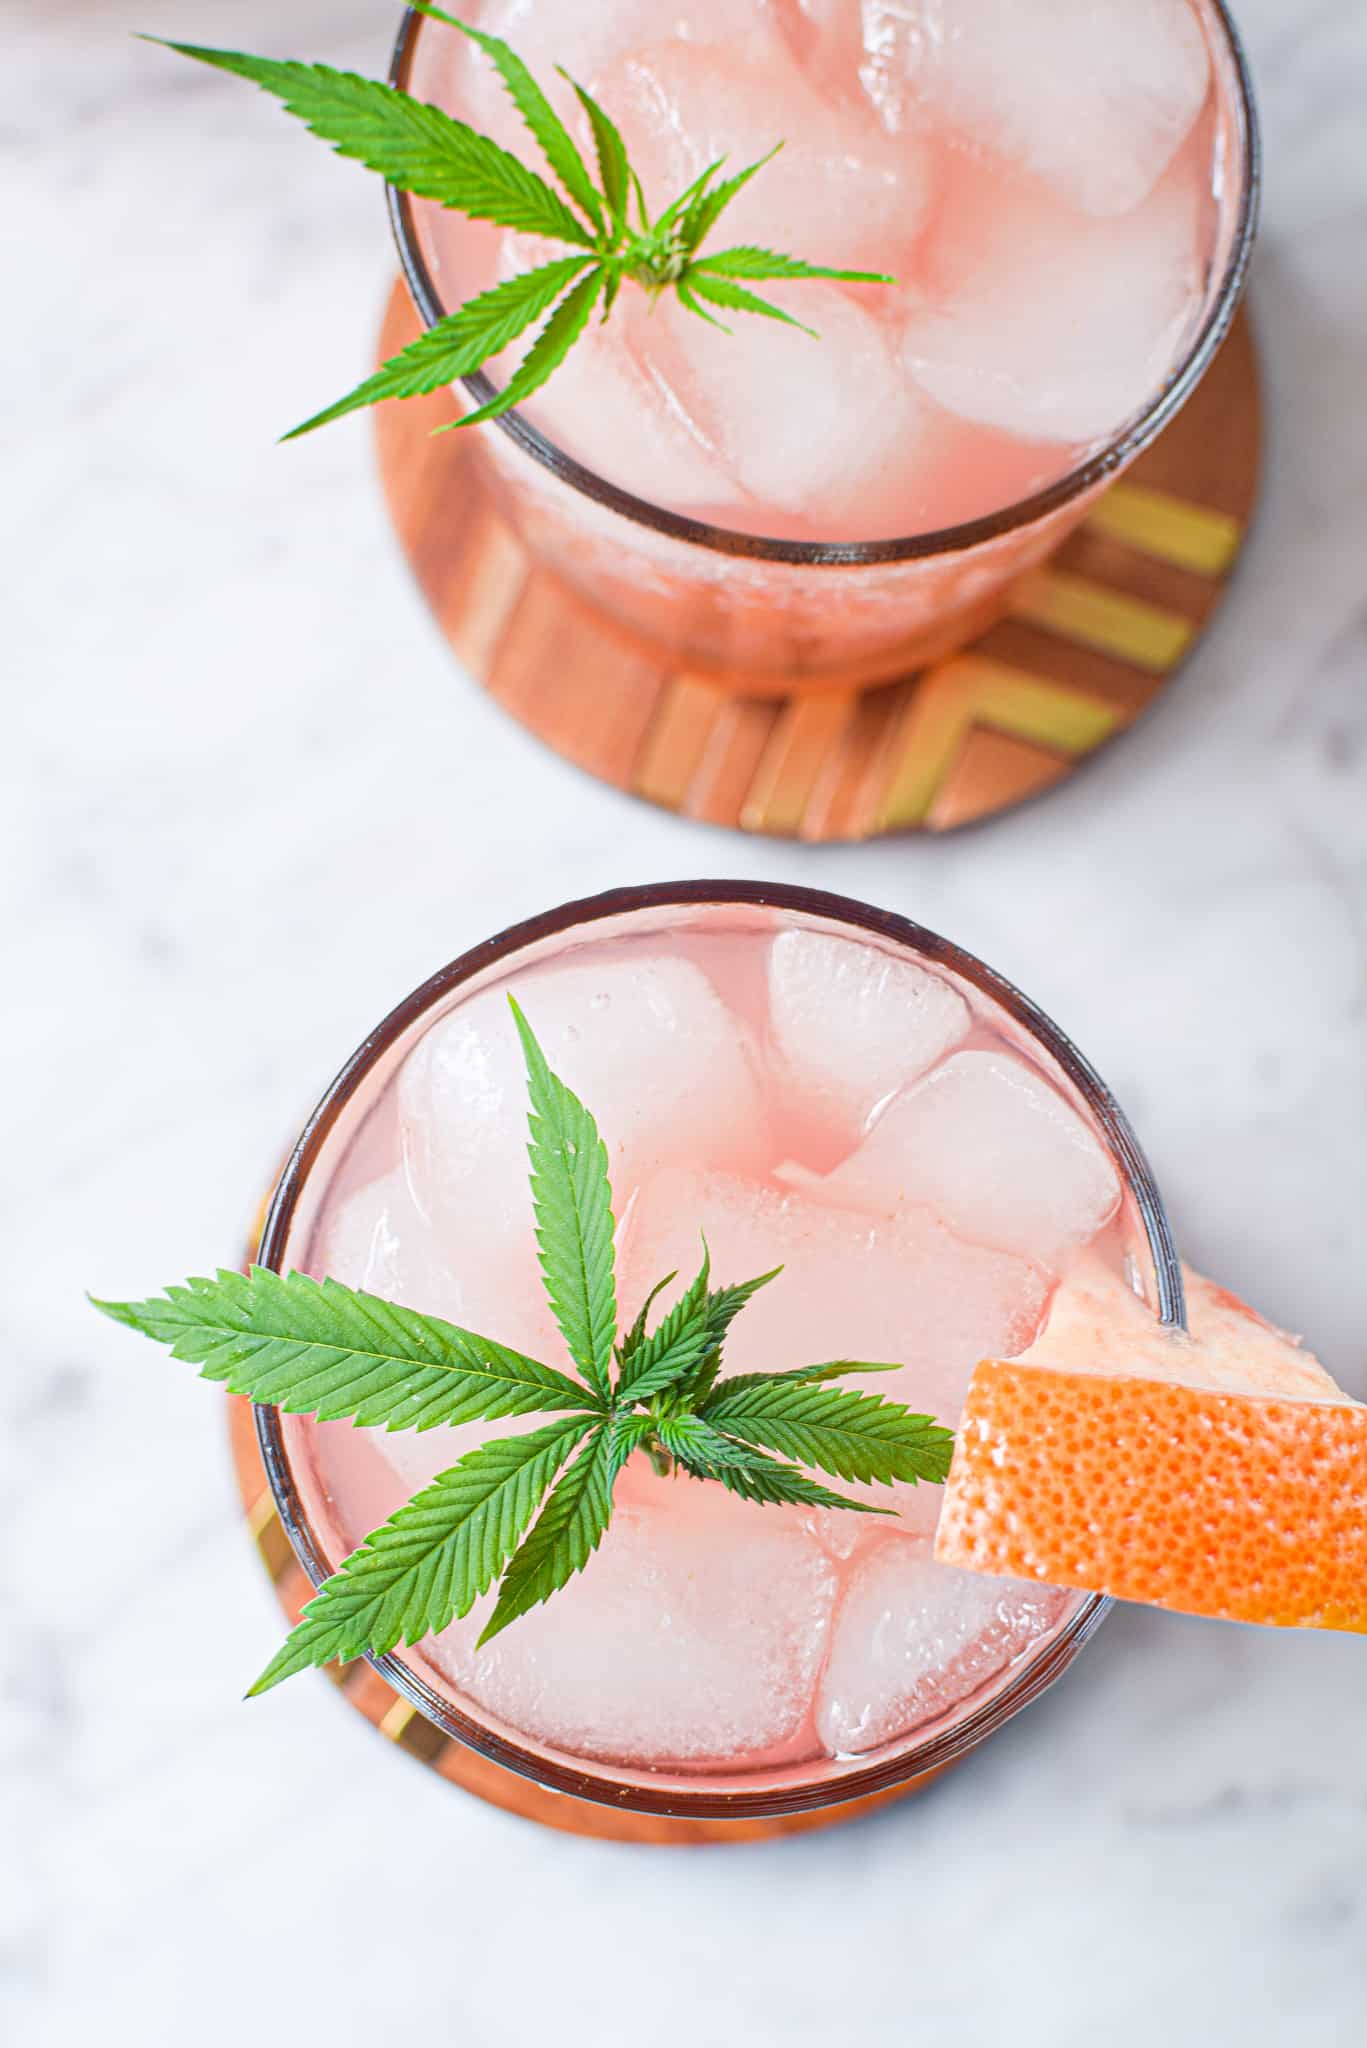 A picture of a glass of the prepared cannabis Paloma cocktail garnished with a cannabis leaf.